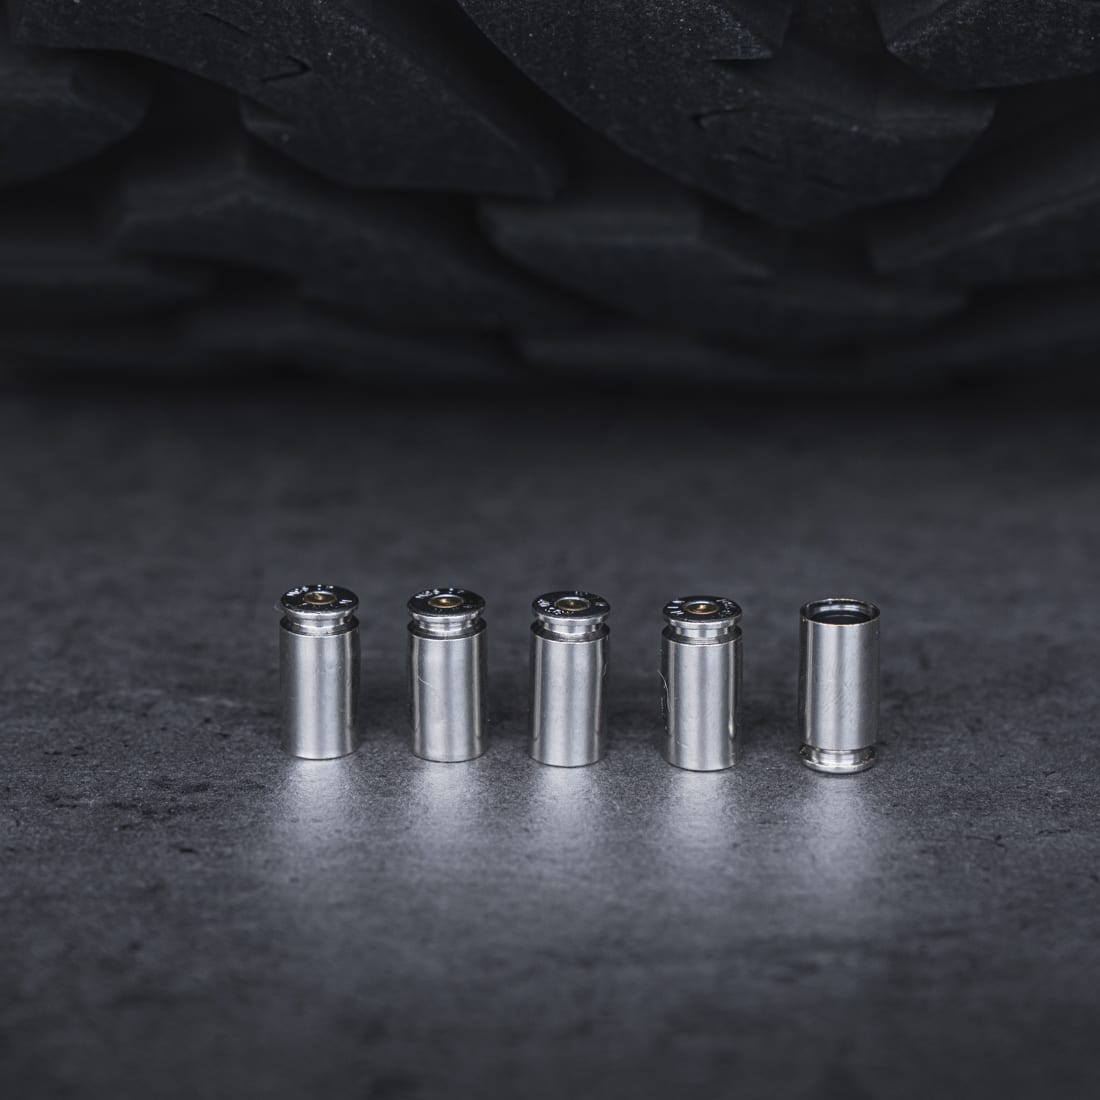 Tire Valve Stem Covers (Set of 5) Freedom Seeds